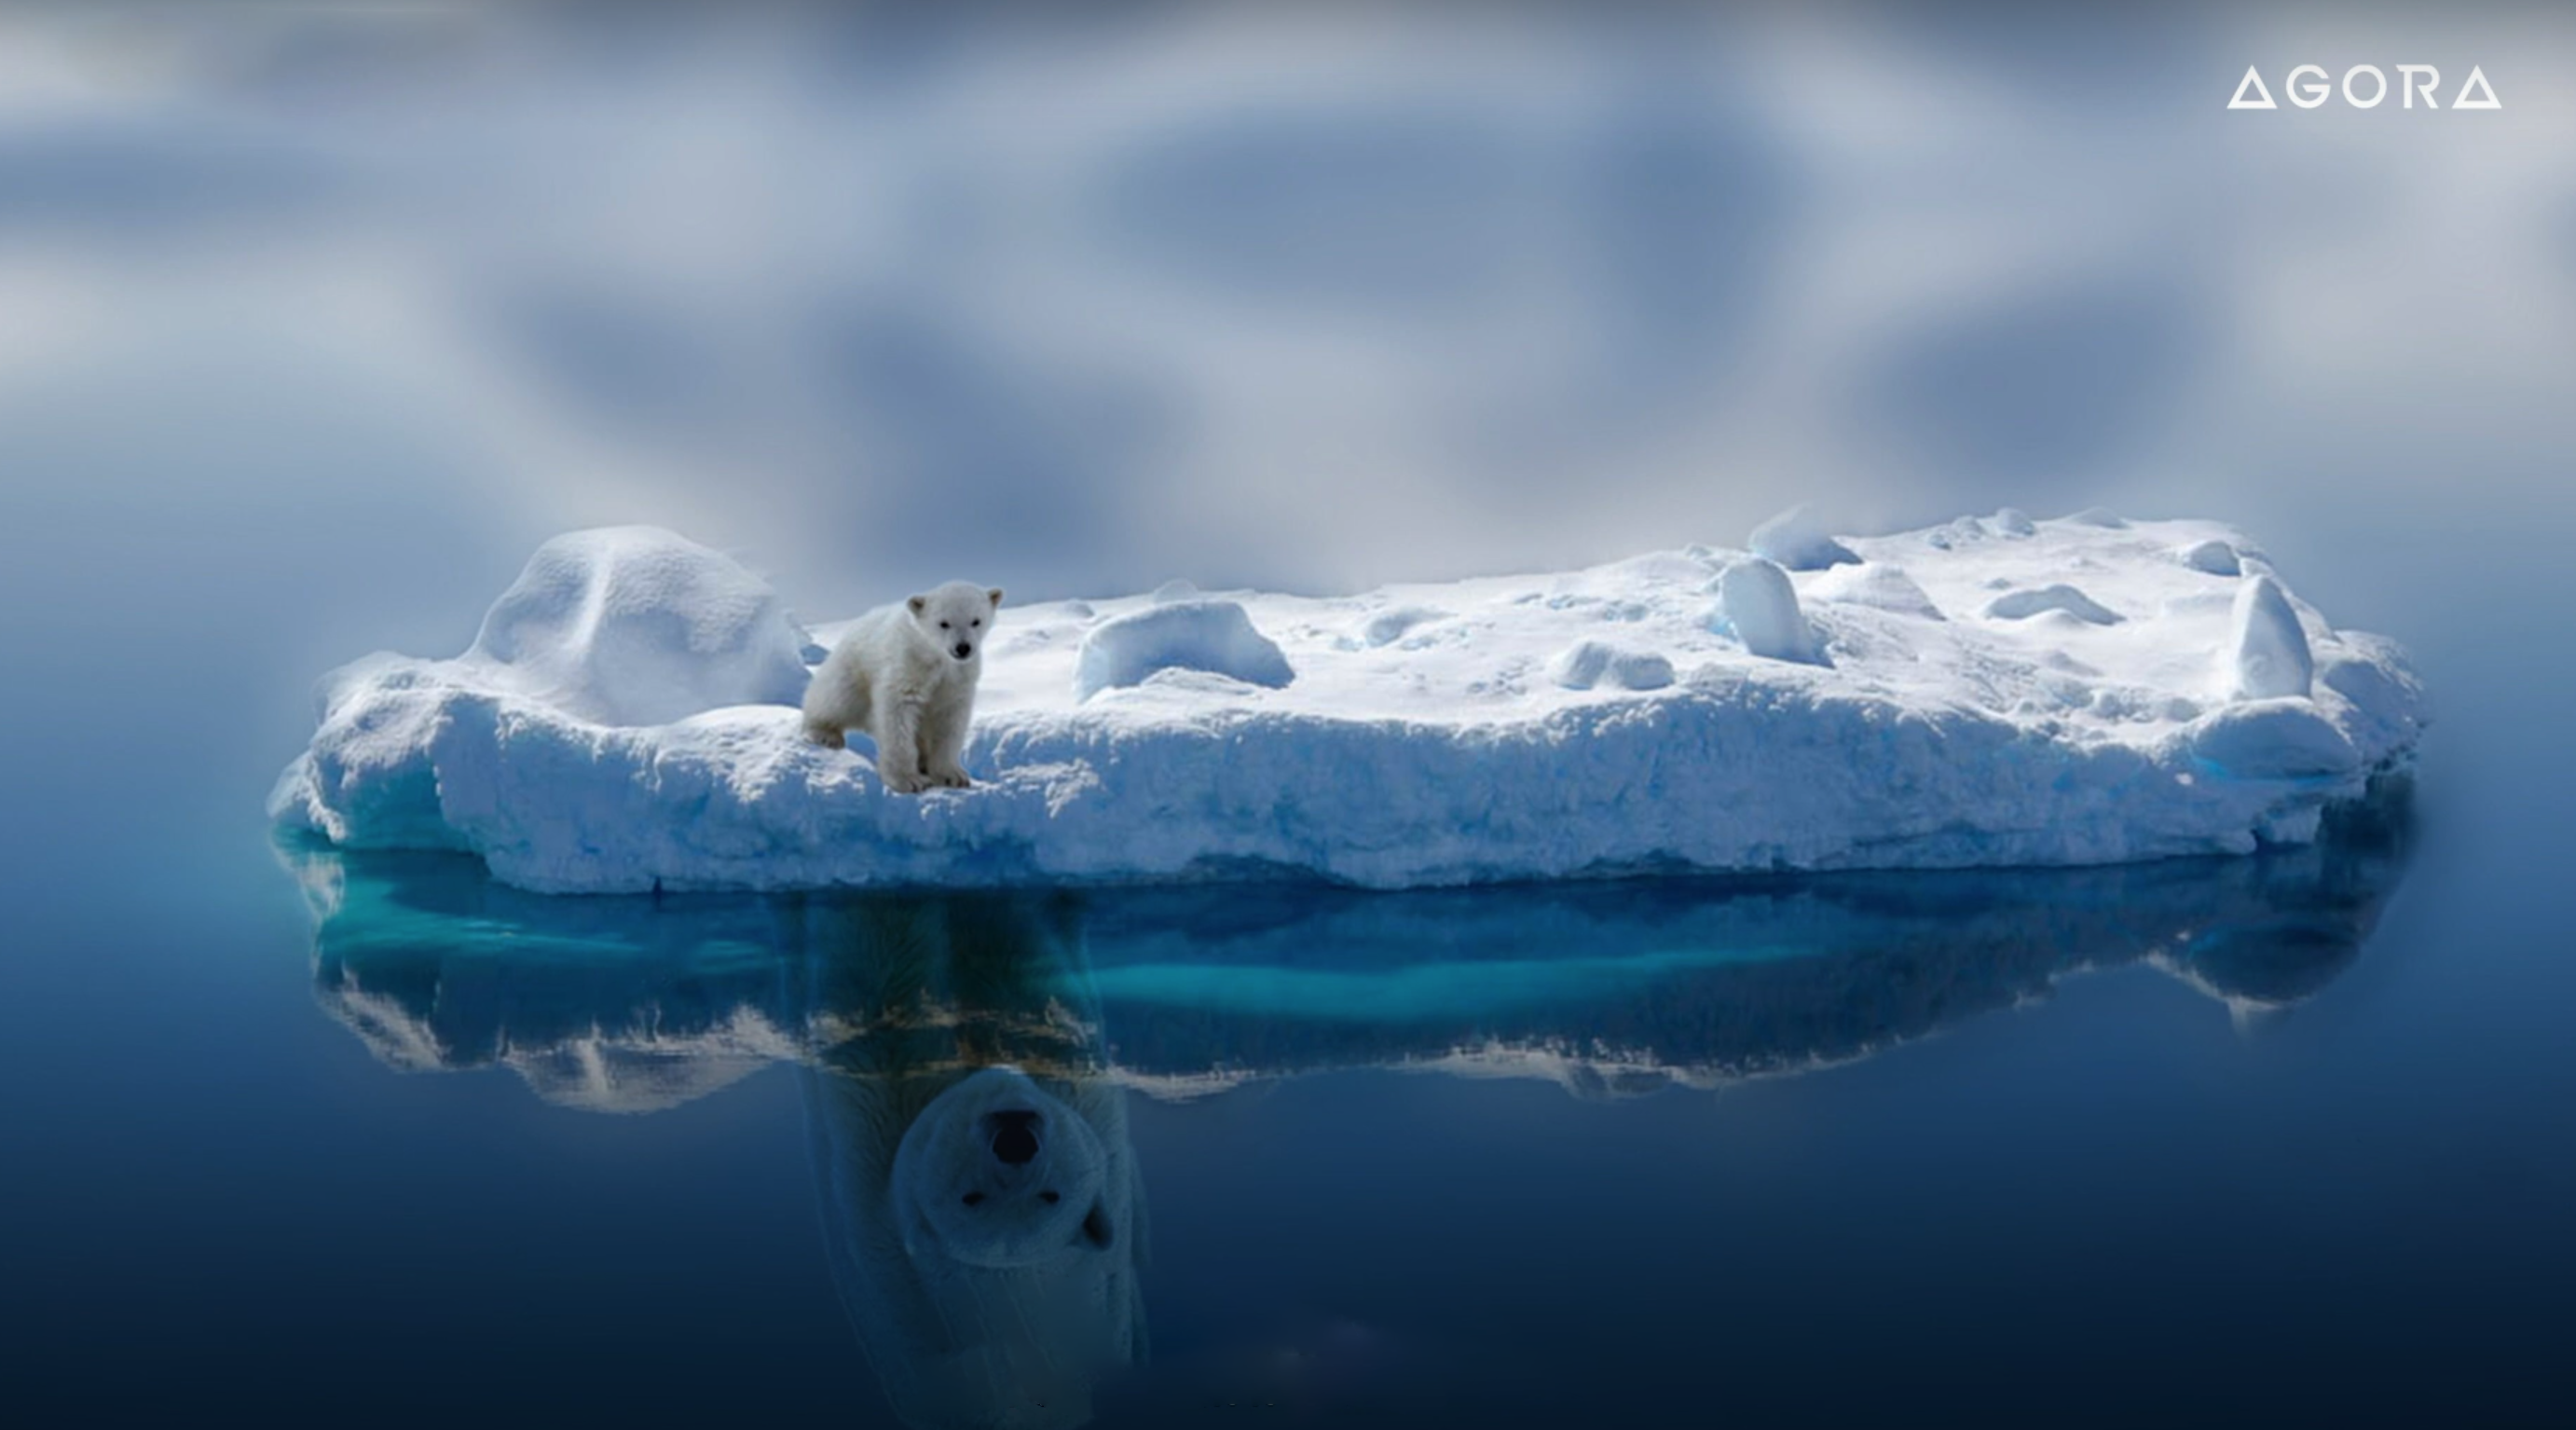 Agora Images: Global Warming Through the Eyes of Paal Uglefisk